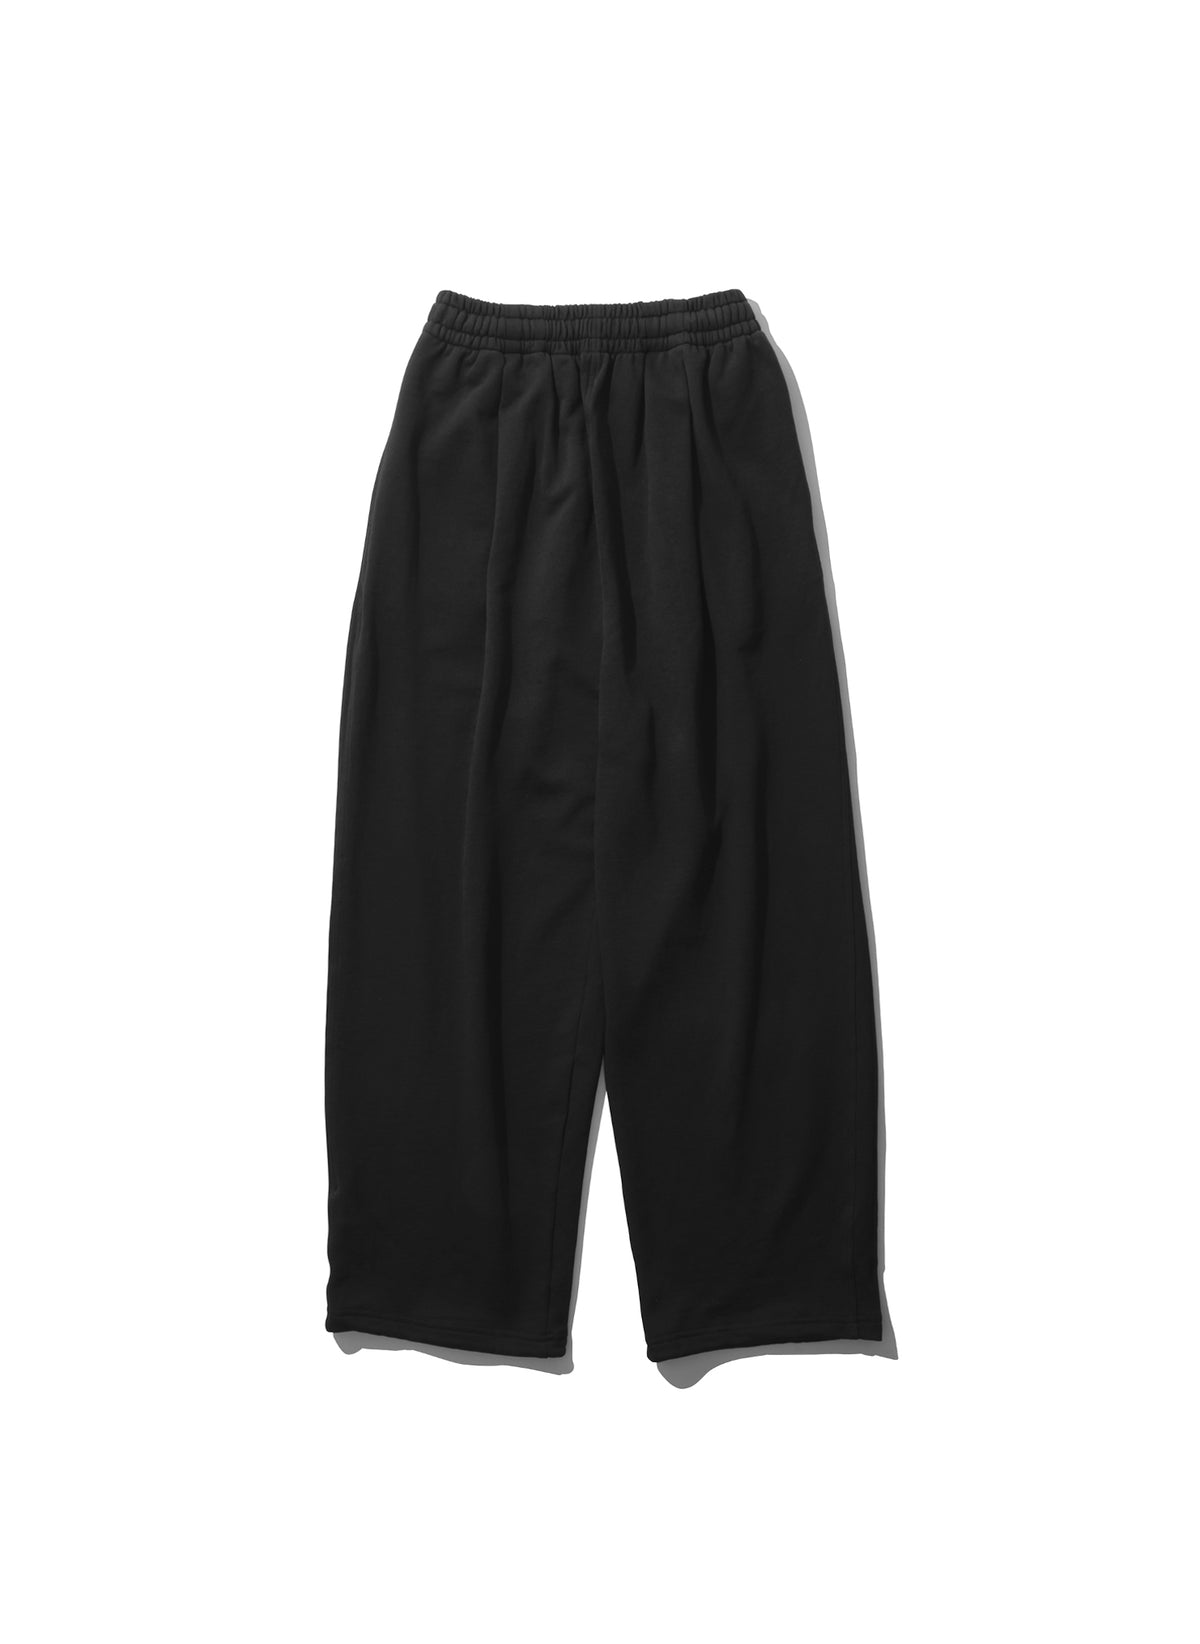 WILLY CHAVARRIA / NORTHSIDER JOGGER PANTS WILLY BLACK